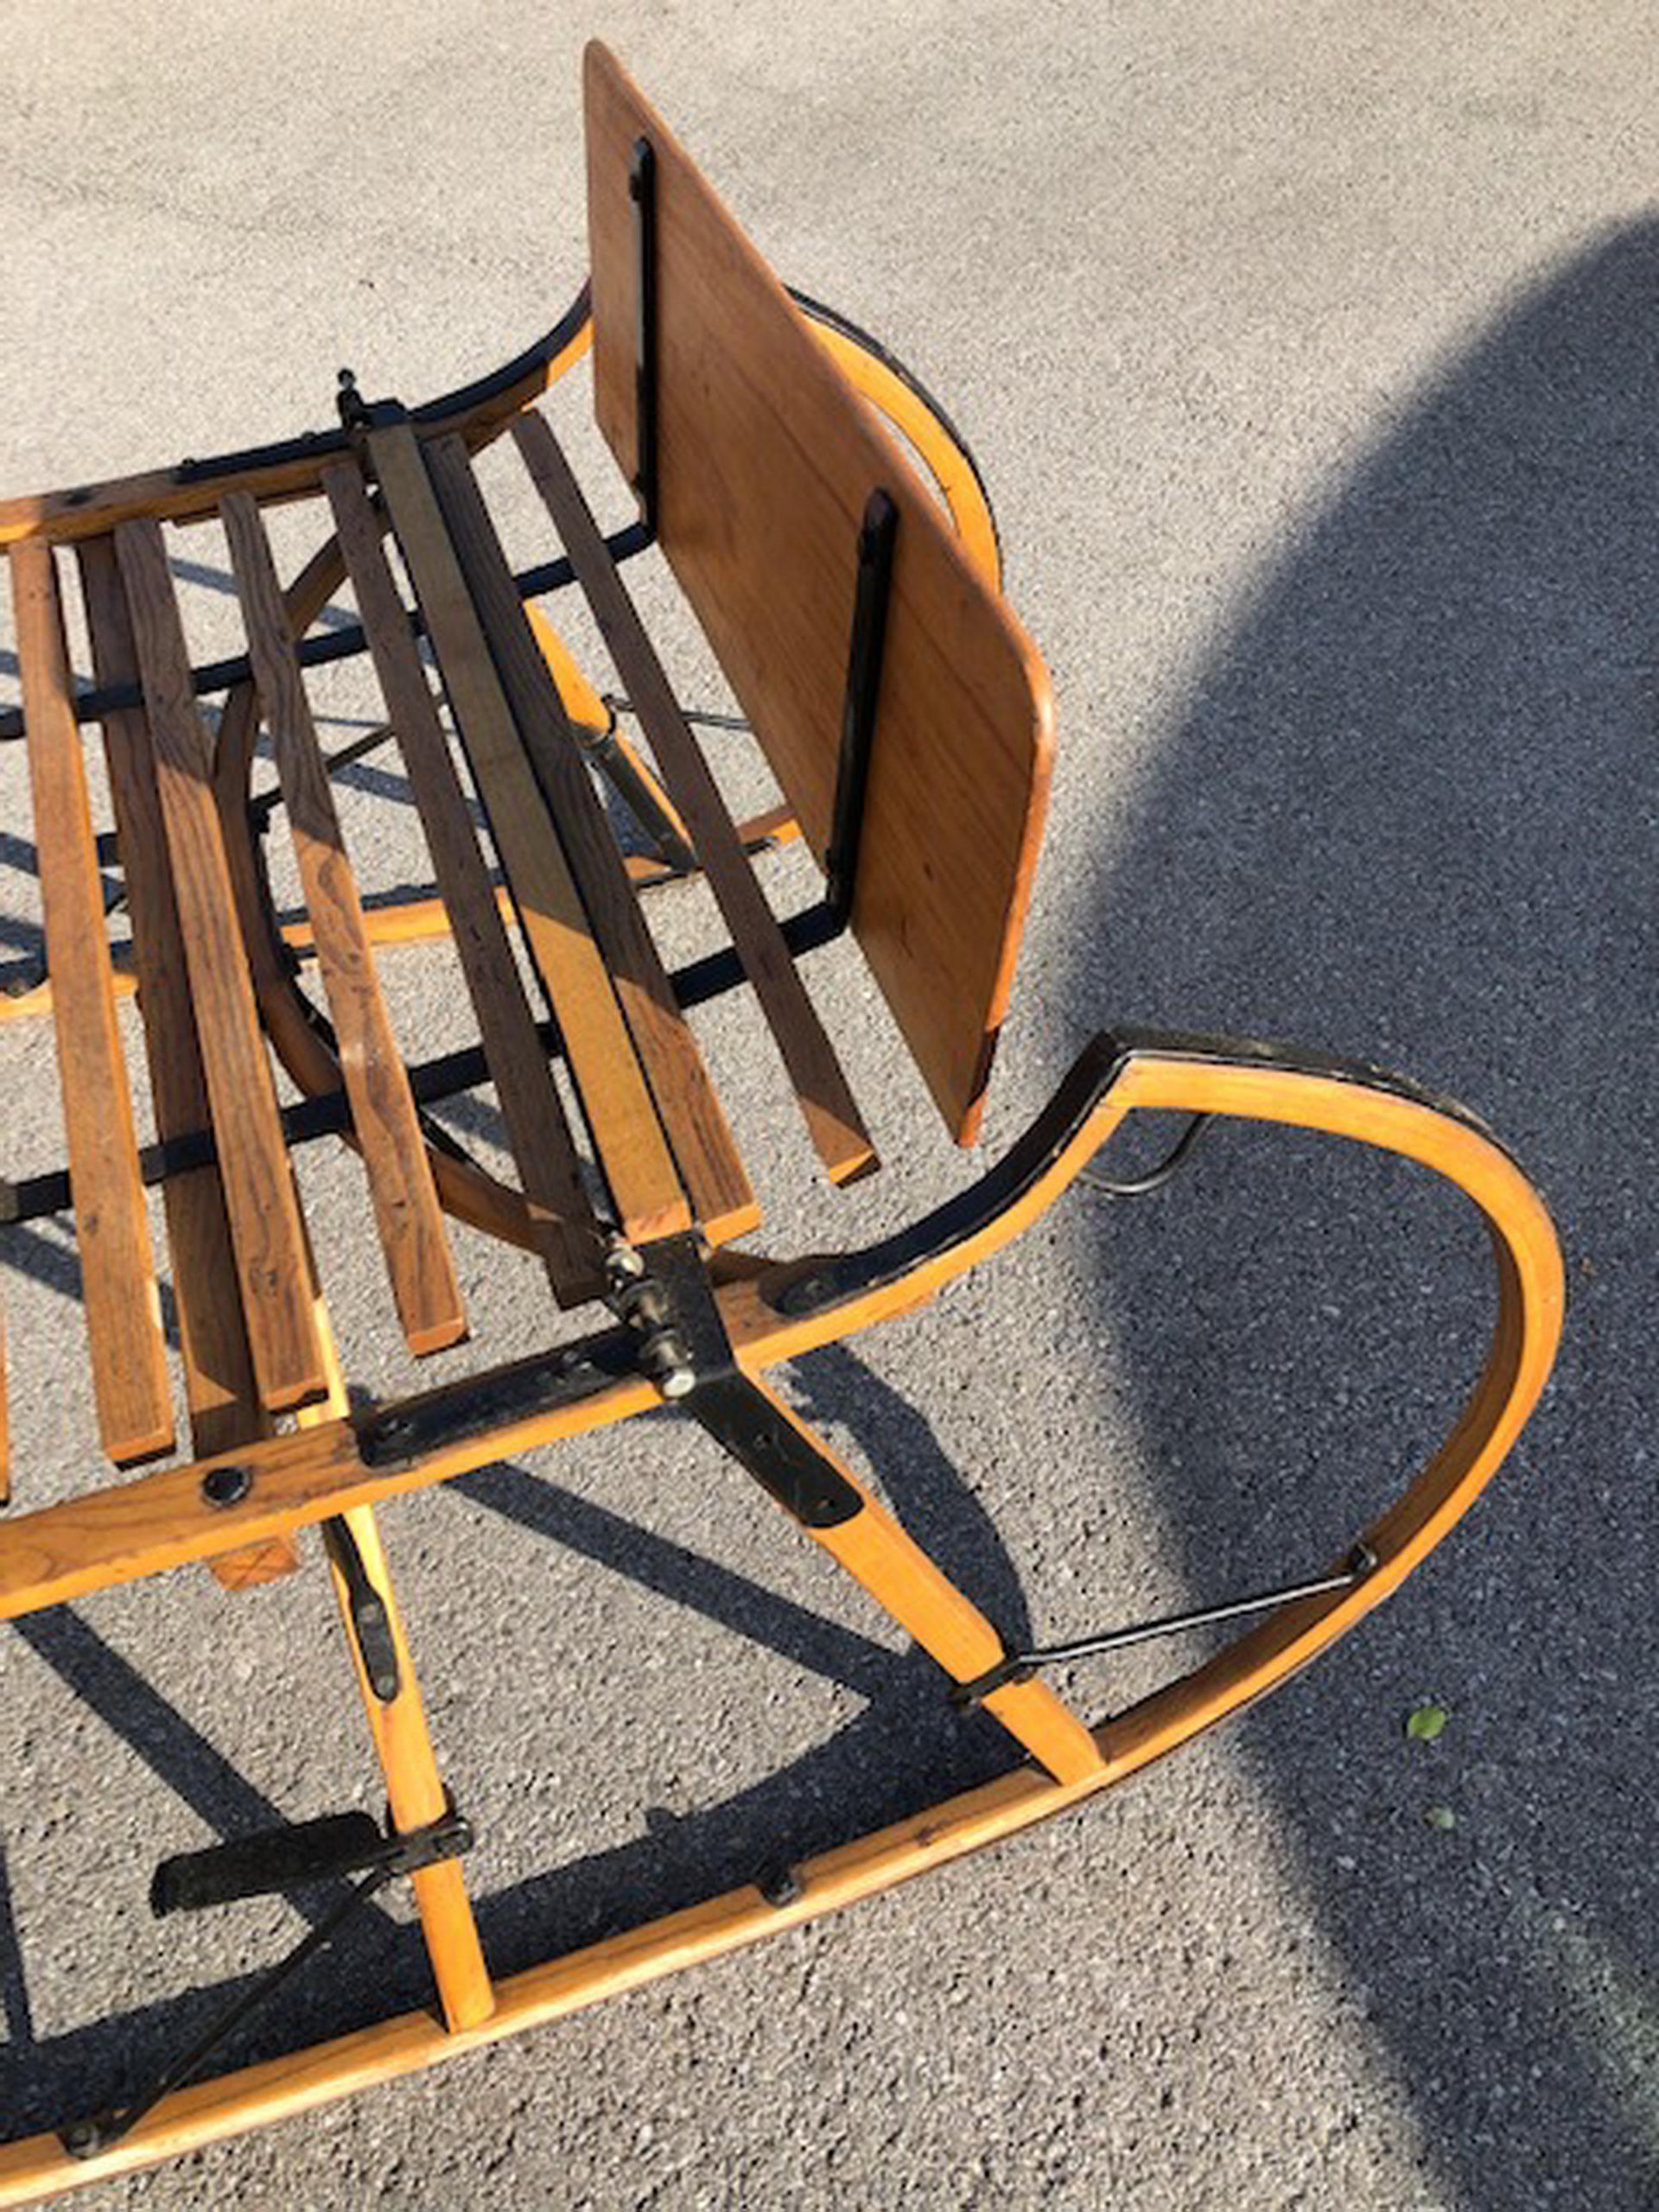 Pretty and well-maintained sleigh or snow sledge from the near of Salzburg in Austria. It is made of massive wood and metal fittings and is in a great condition.

It is very well preserved and can still be used for its original purpose.

This is